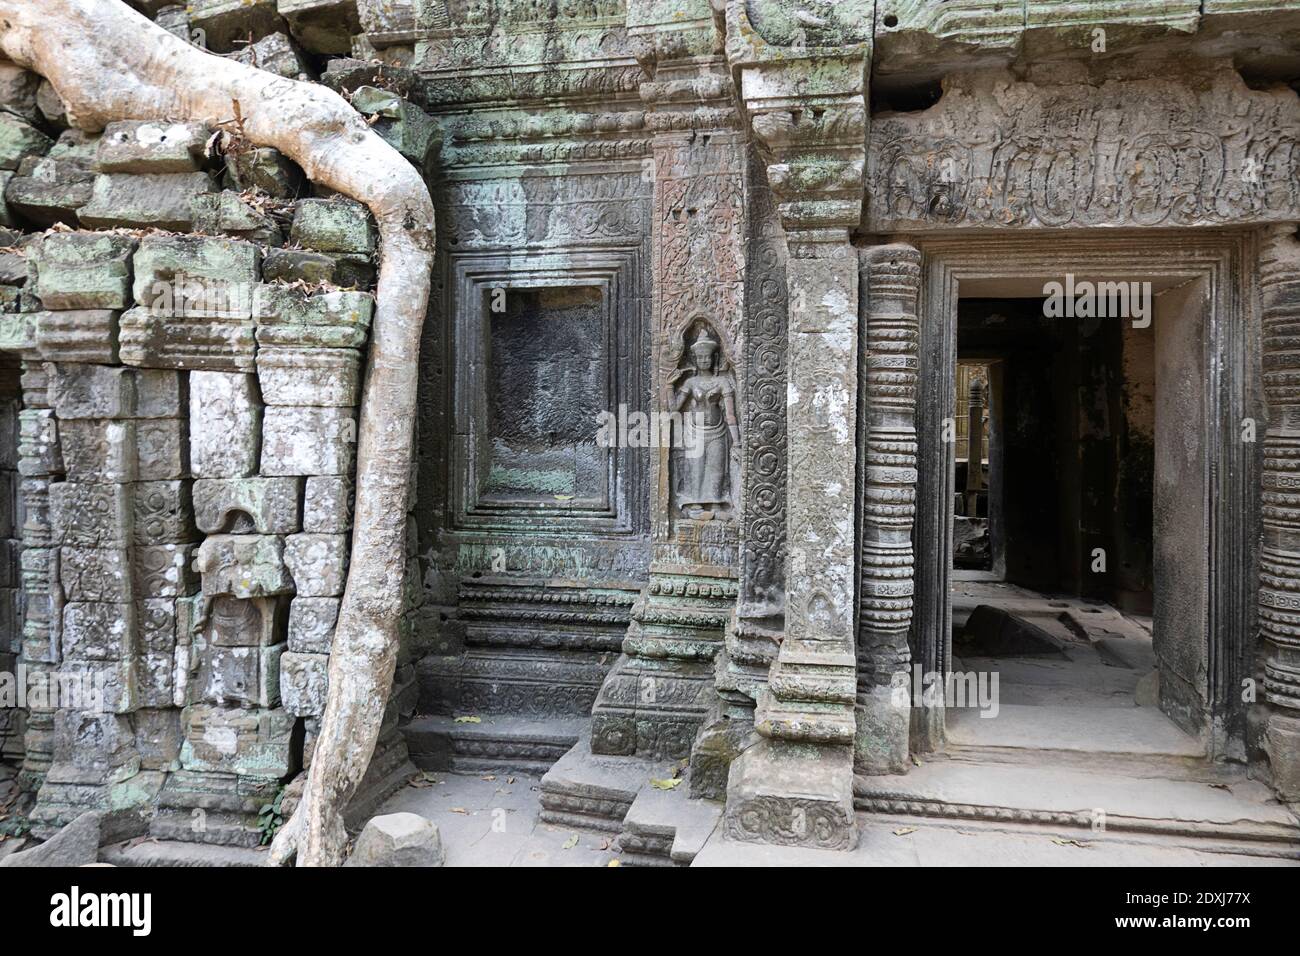 Bas-relief on the walls of Angkor Wat Stock Photo